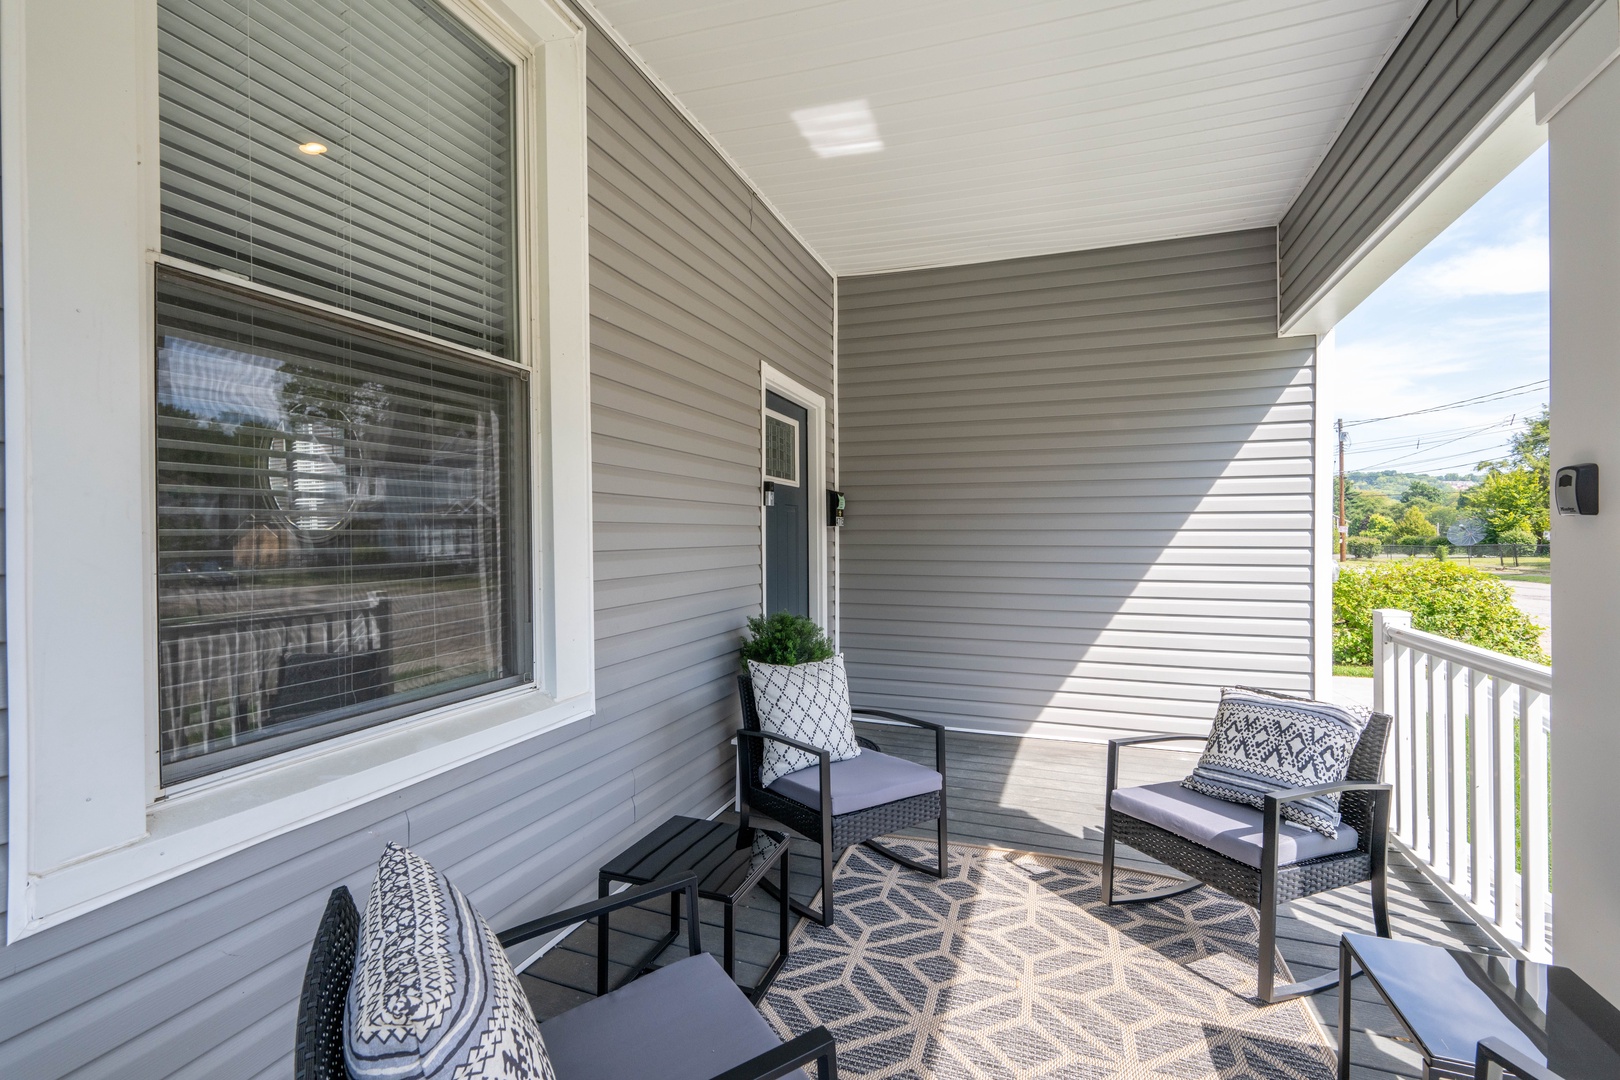 Relax & enjoy the fresh air on the spacious front porch